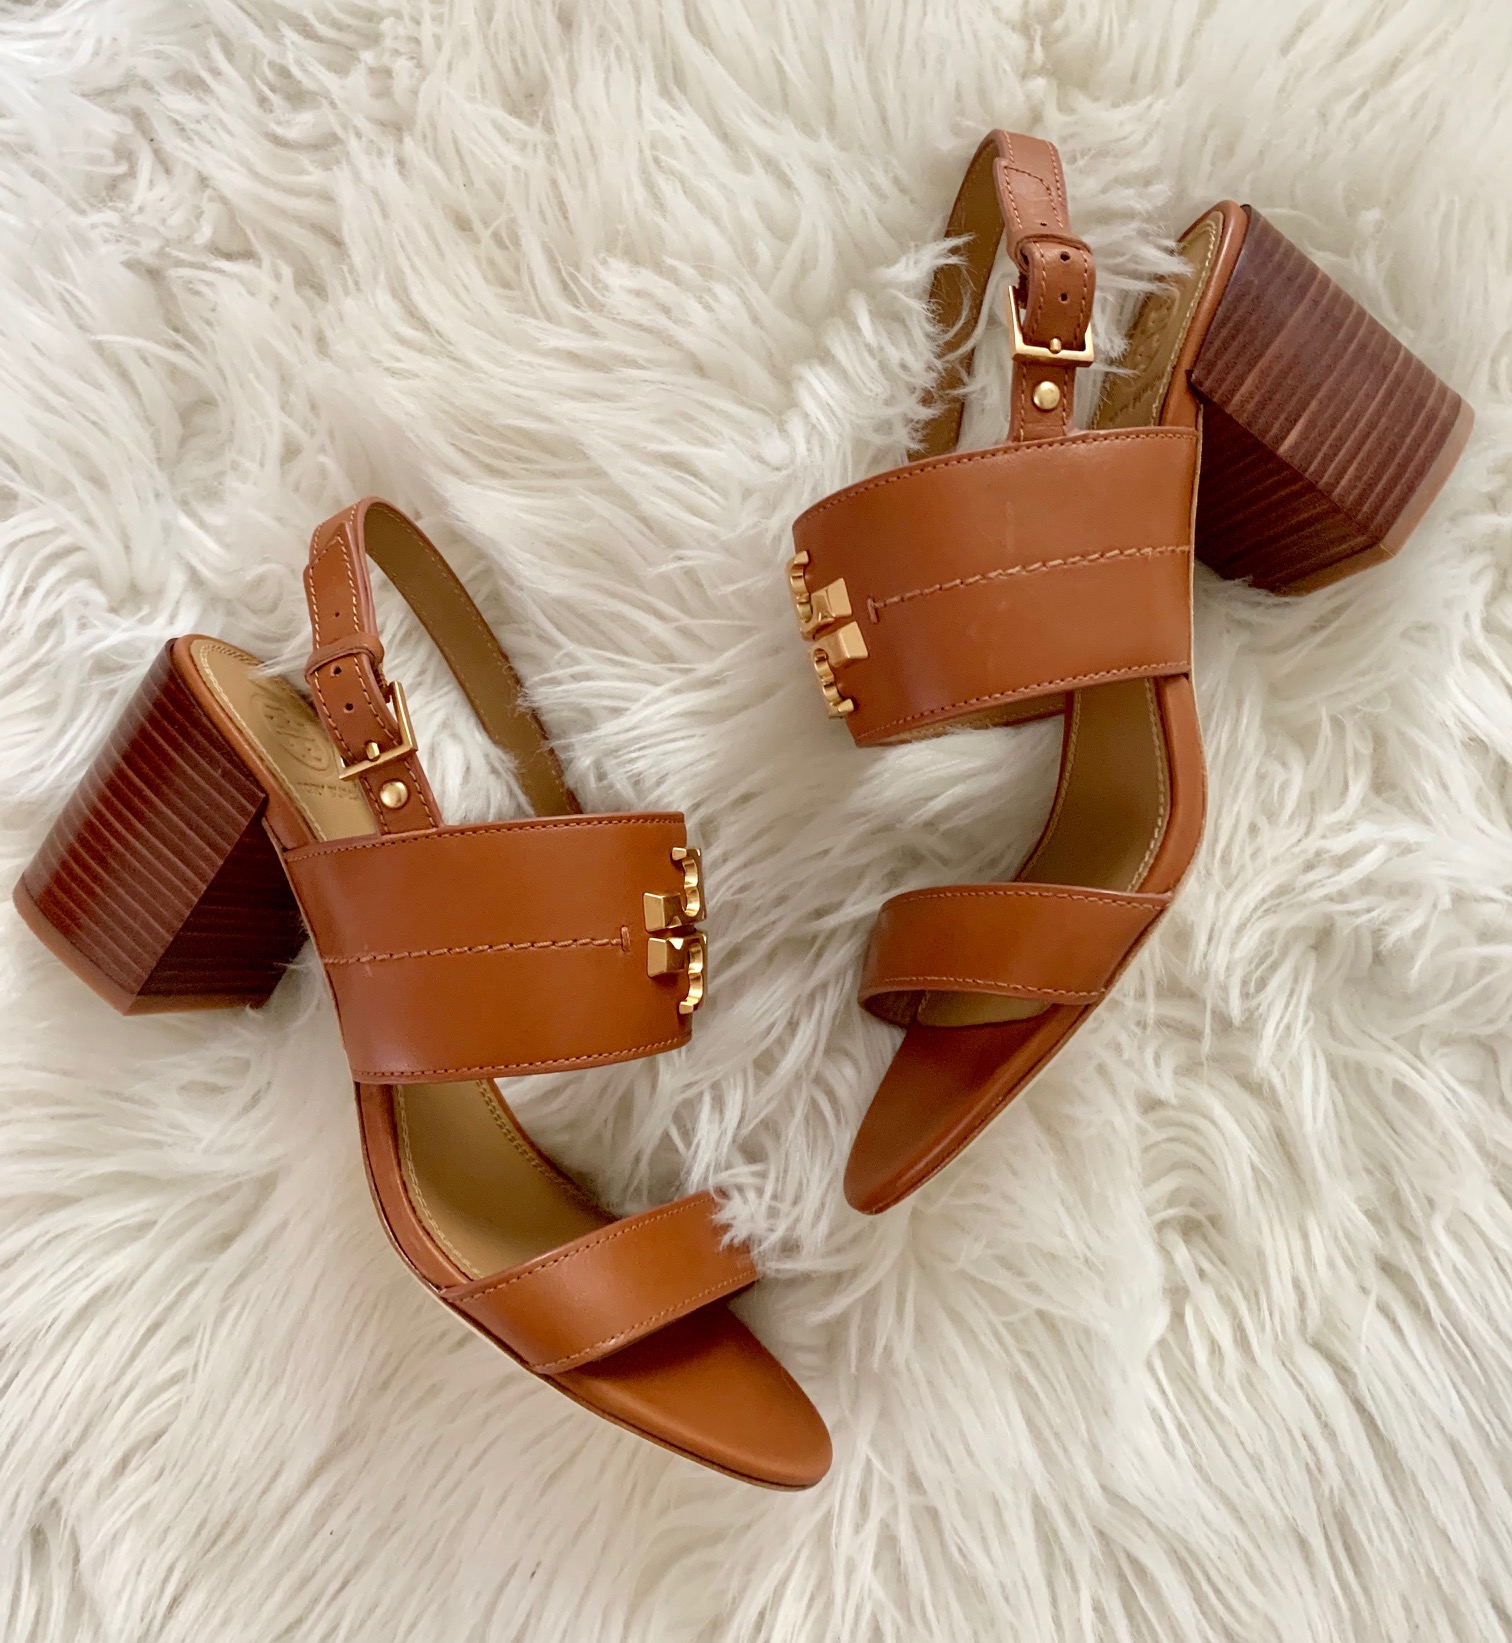 Top 10 Favorite #NSALE 2019 Shoes - The Double Take Girls